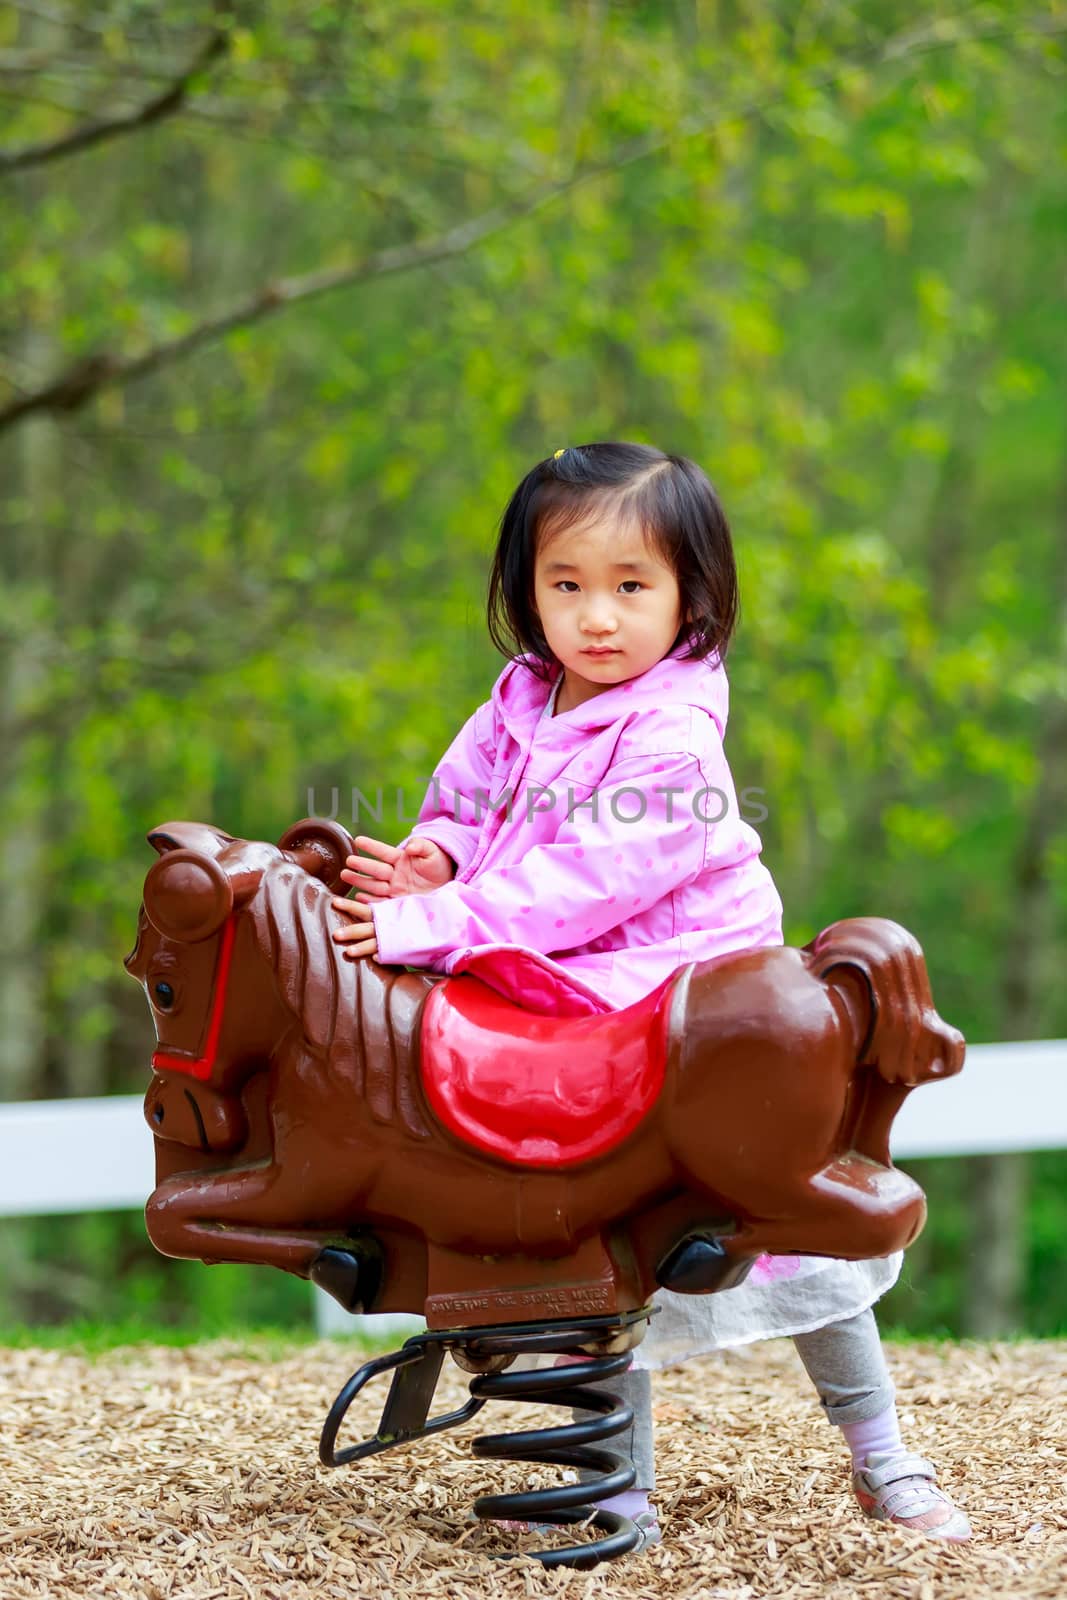 Adorable girl plays in the playground, on a wooden horse.